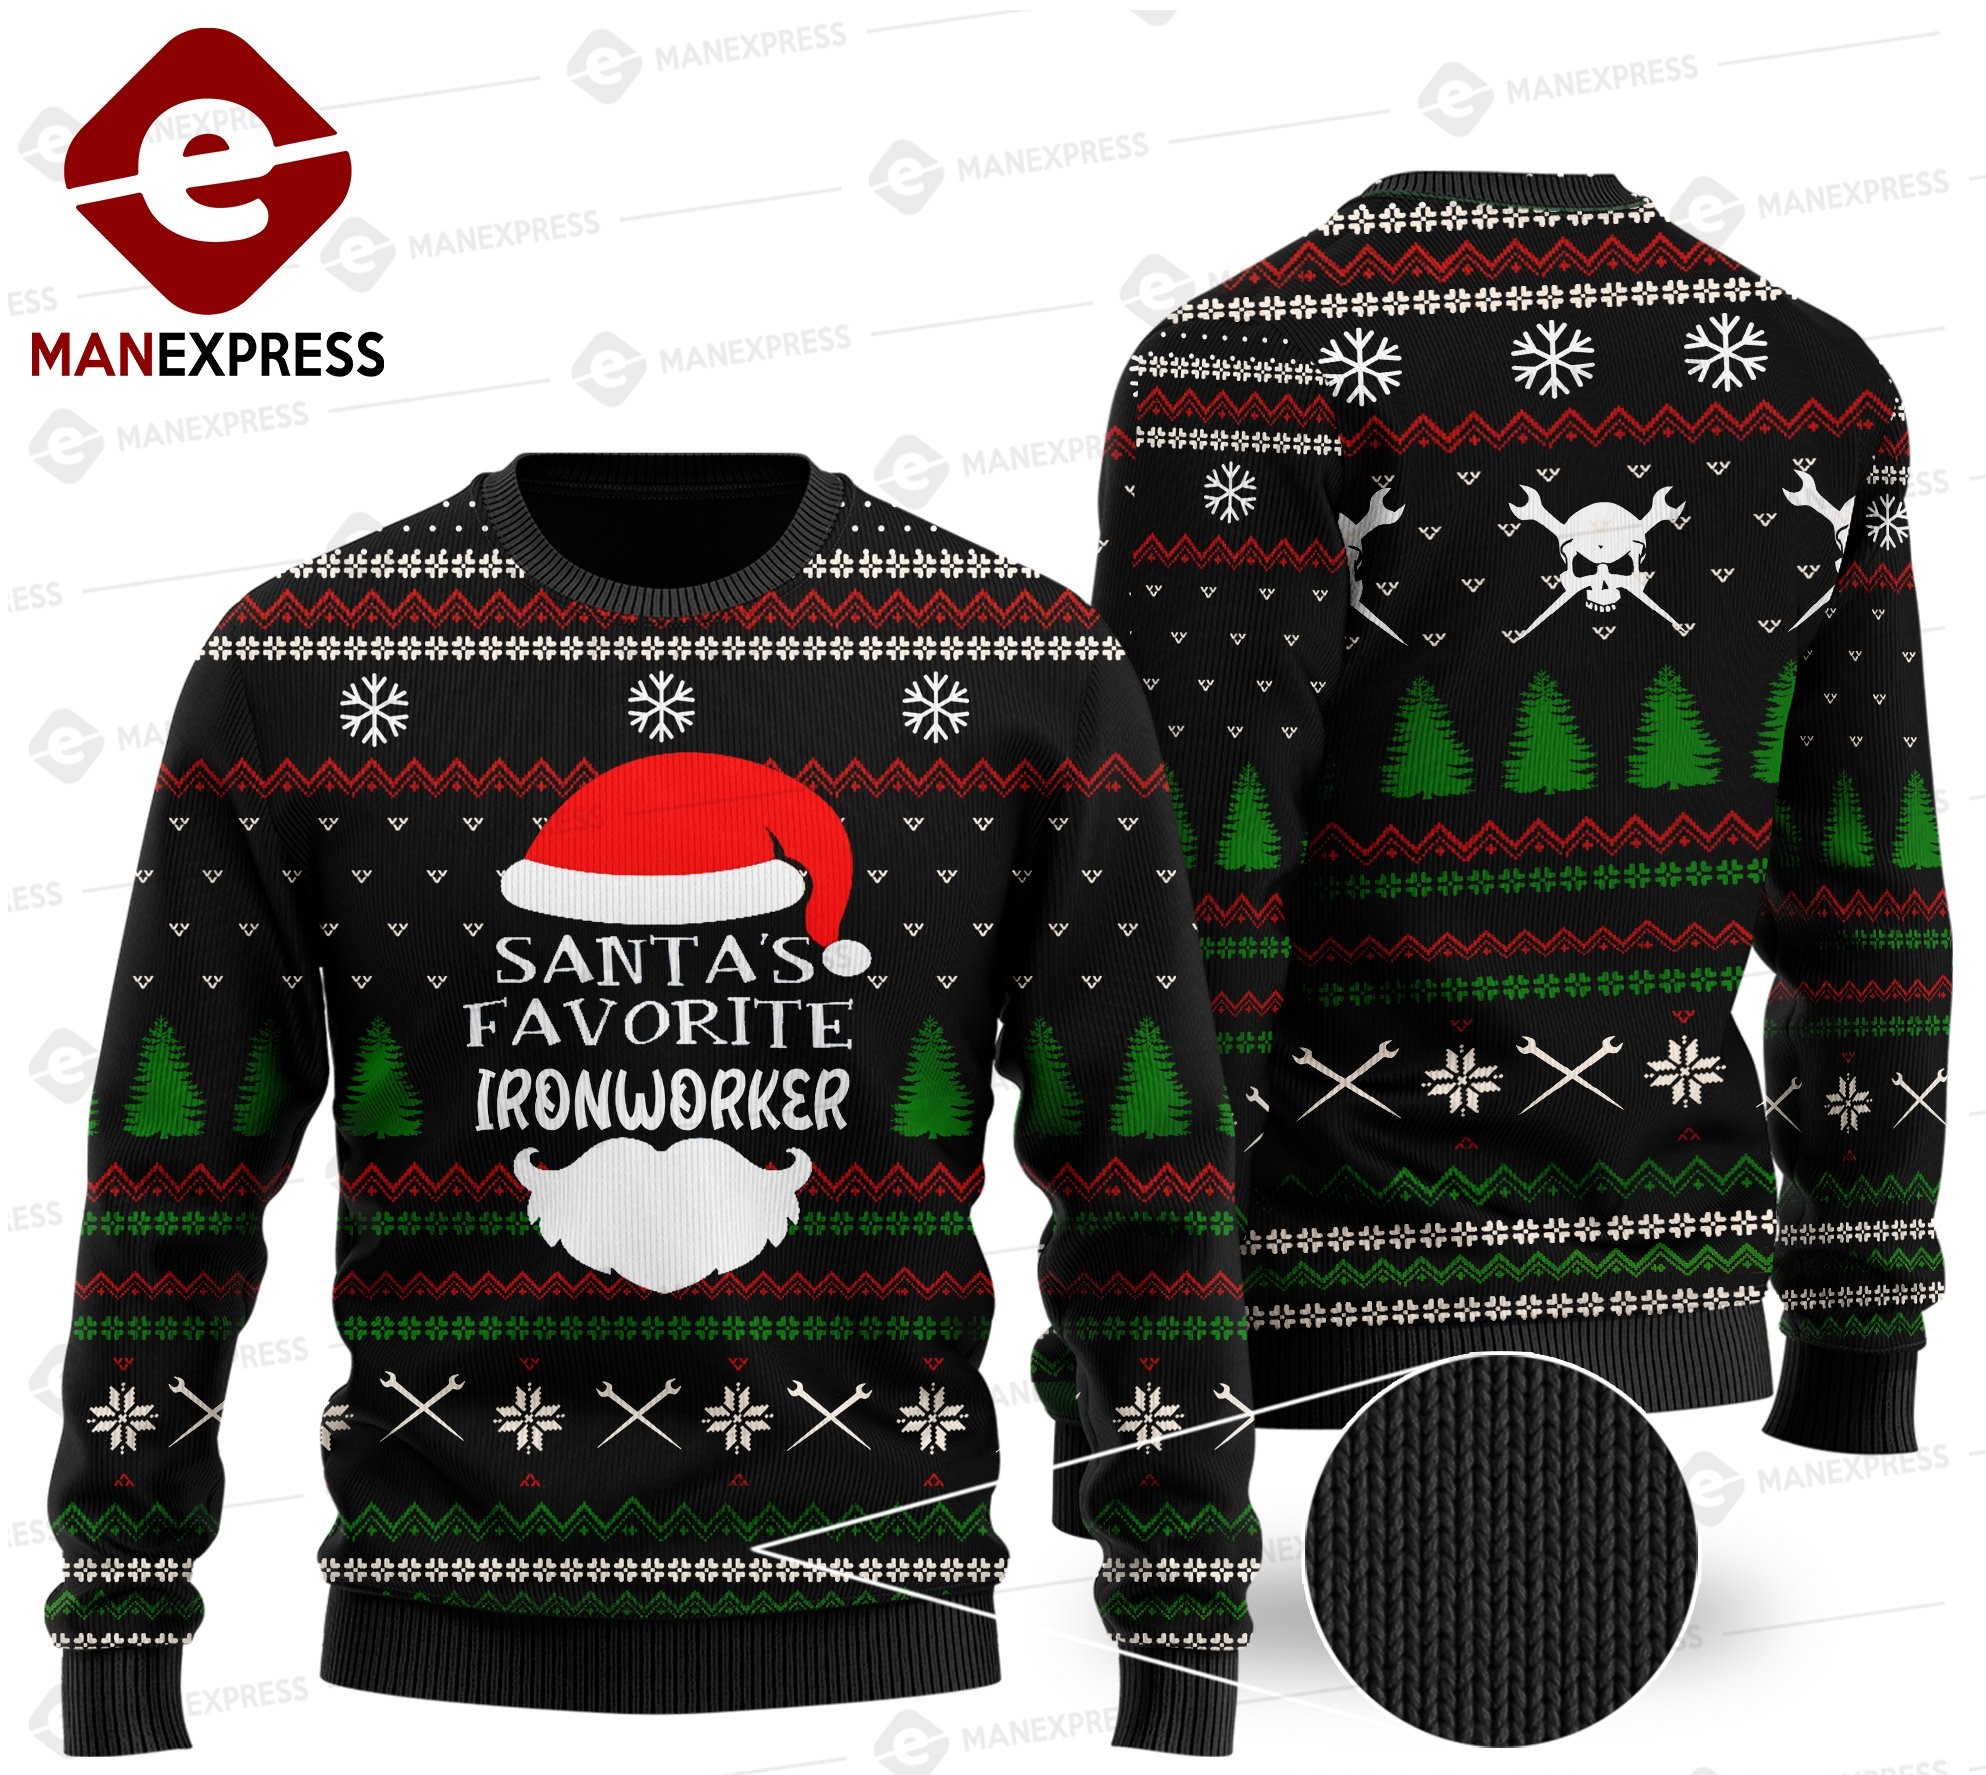 santas favorite ironworker all over print ugly christmas sweater 2